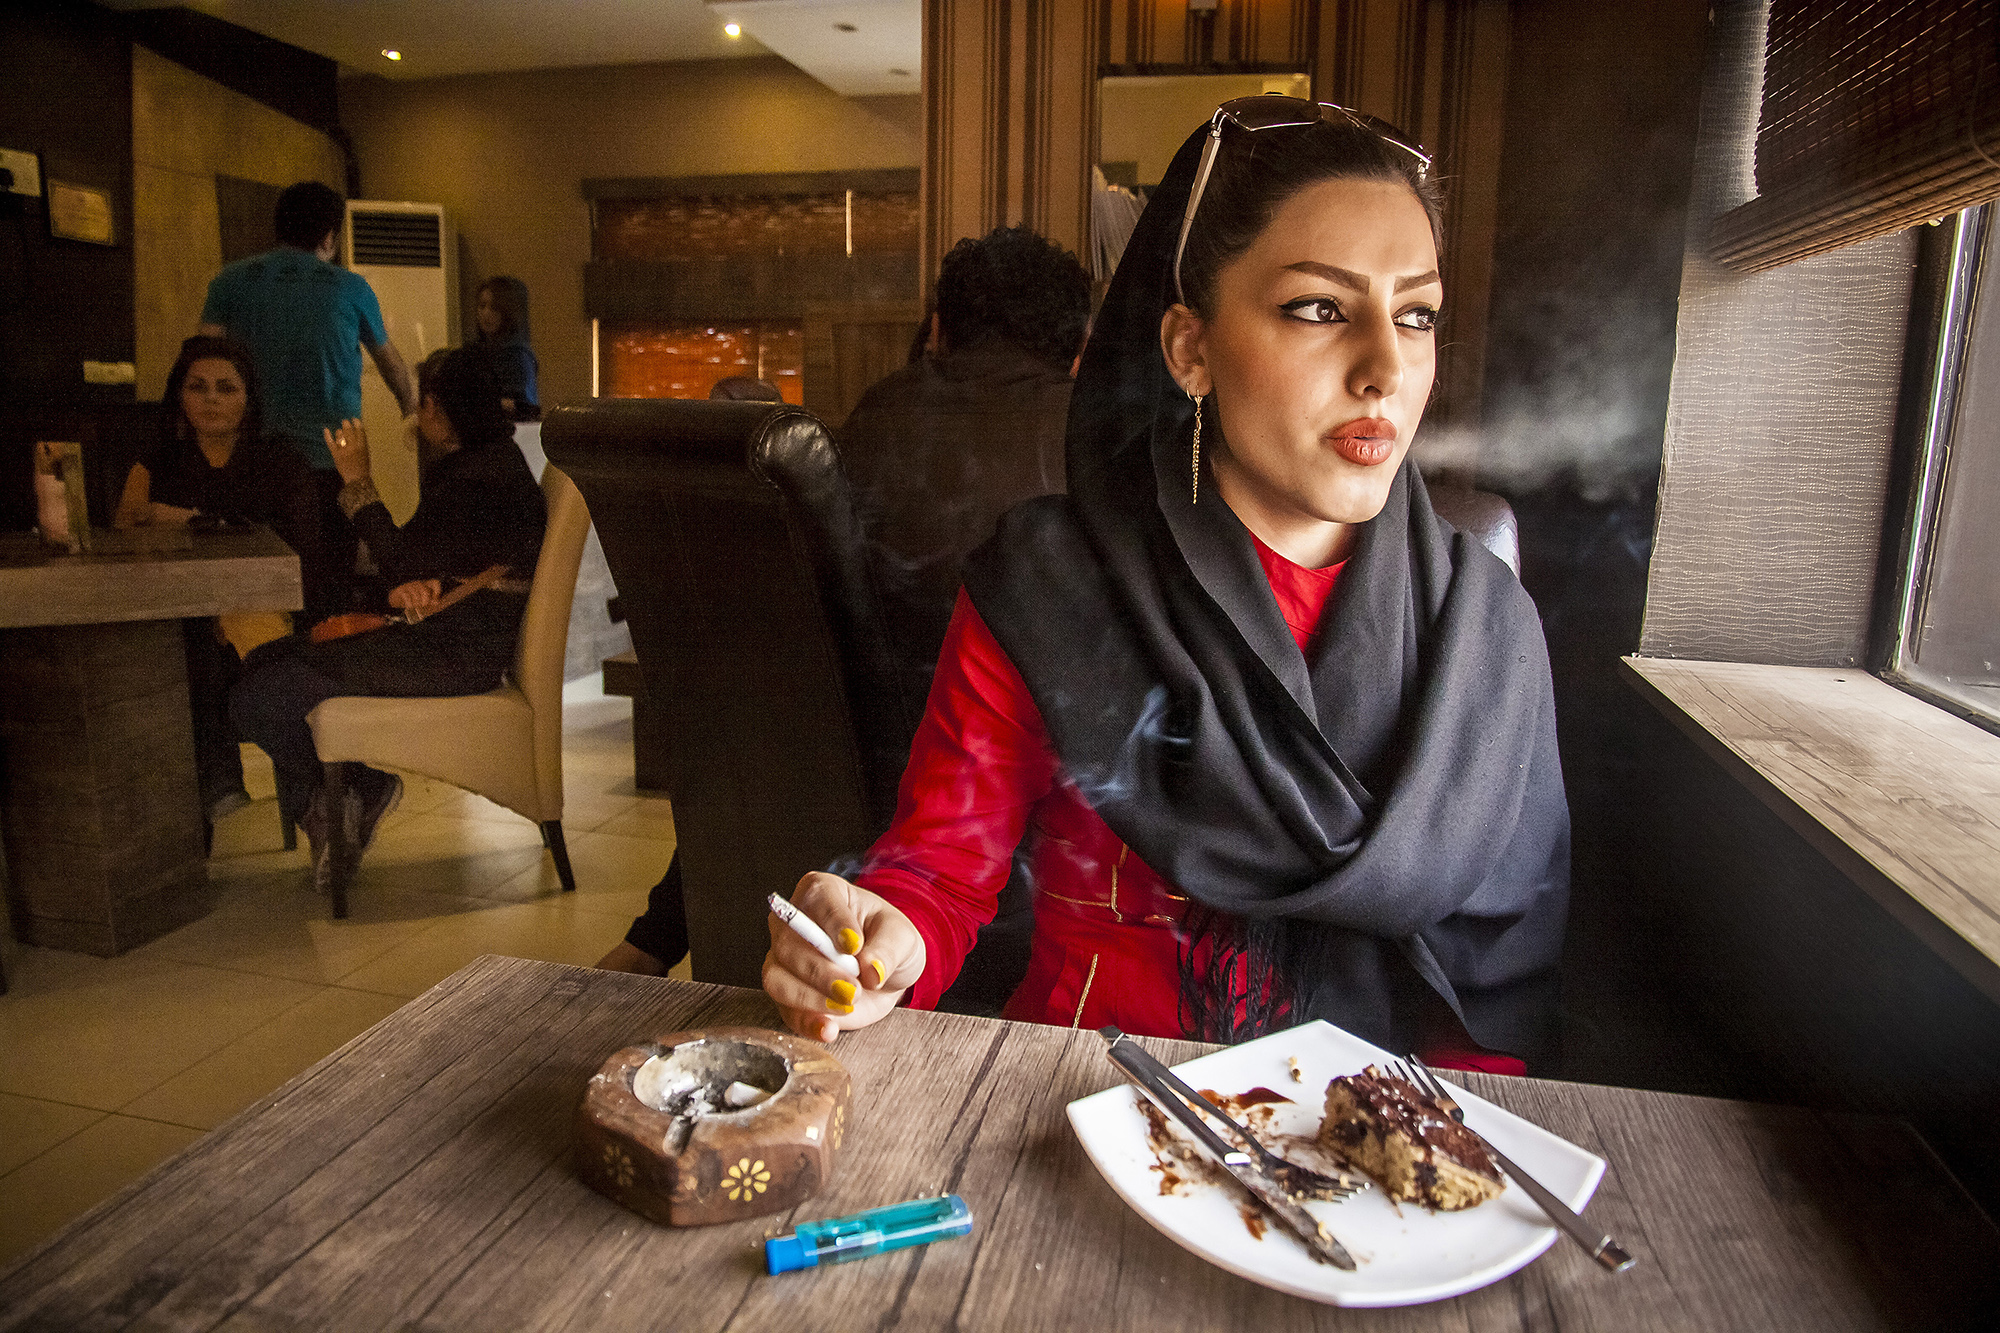 Mehran Hamrahi won the student Alexia competition for his story on "Iranian People, Ordinary or Criminals." Sheida, 18, smokes a cigarette in a café in Ahvaz, Southern Iran, July 1, 2013. She said, "I feel safe in the café." Smoking the cigarette is not restricted legally in Iran, however the girls are afraid of smoking in public places. The radical Muslims and traditional people consider this as a abominable act for girls.